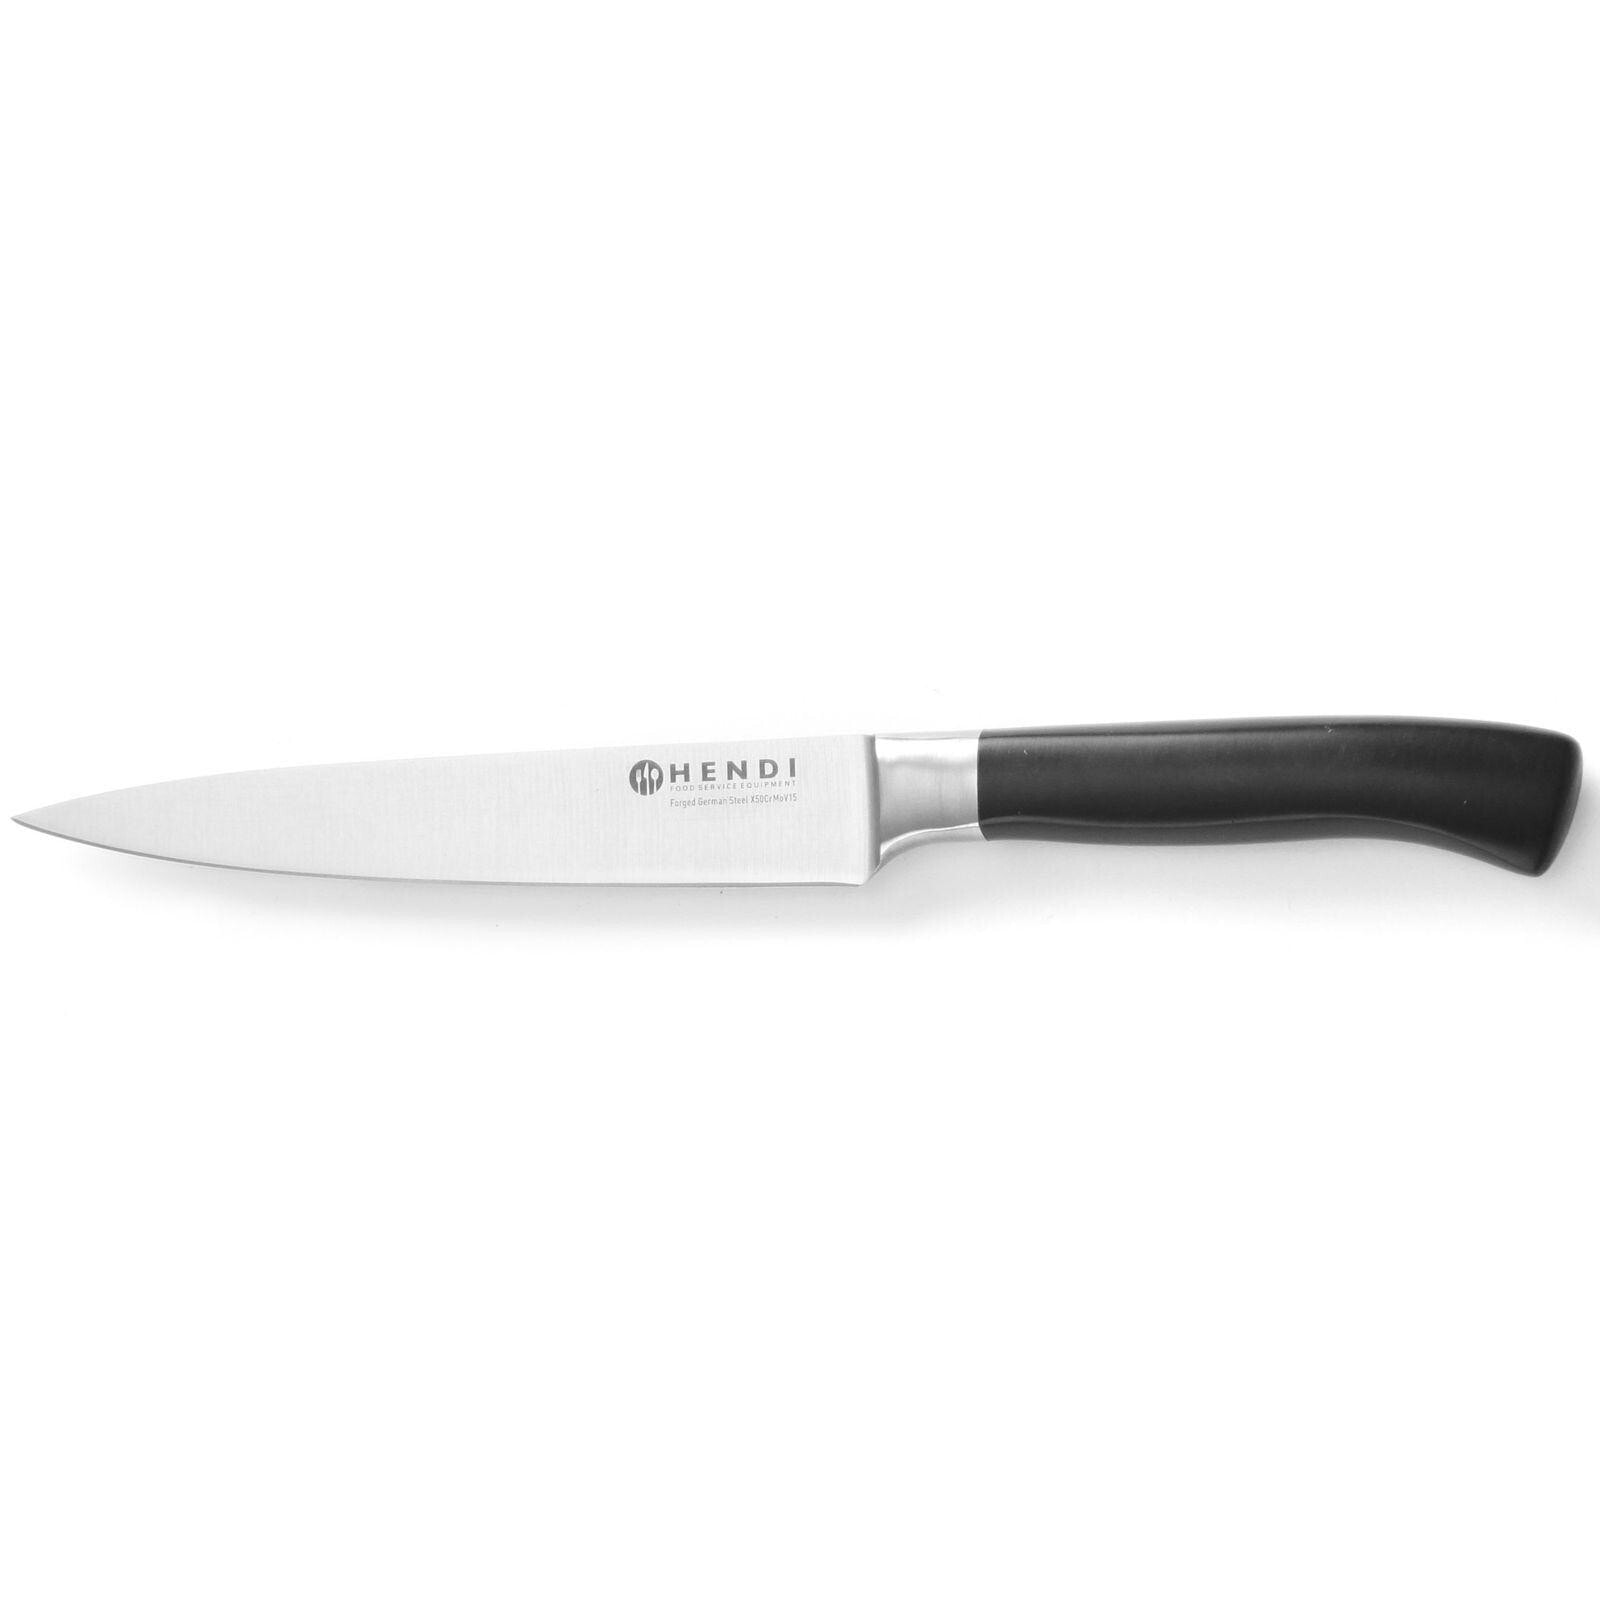 Professional chef's knife forged from Profi Line steel - Hendi 844250